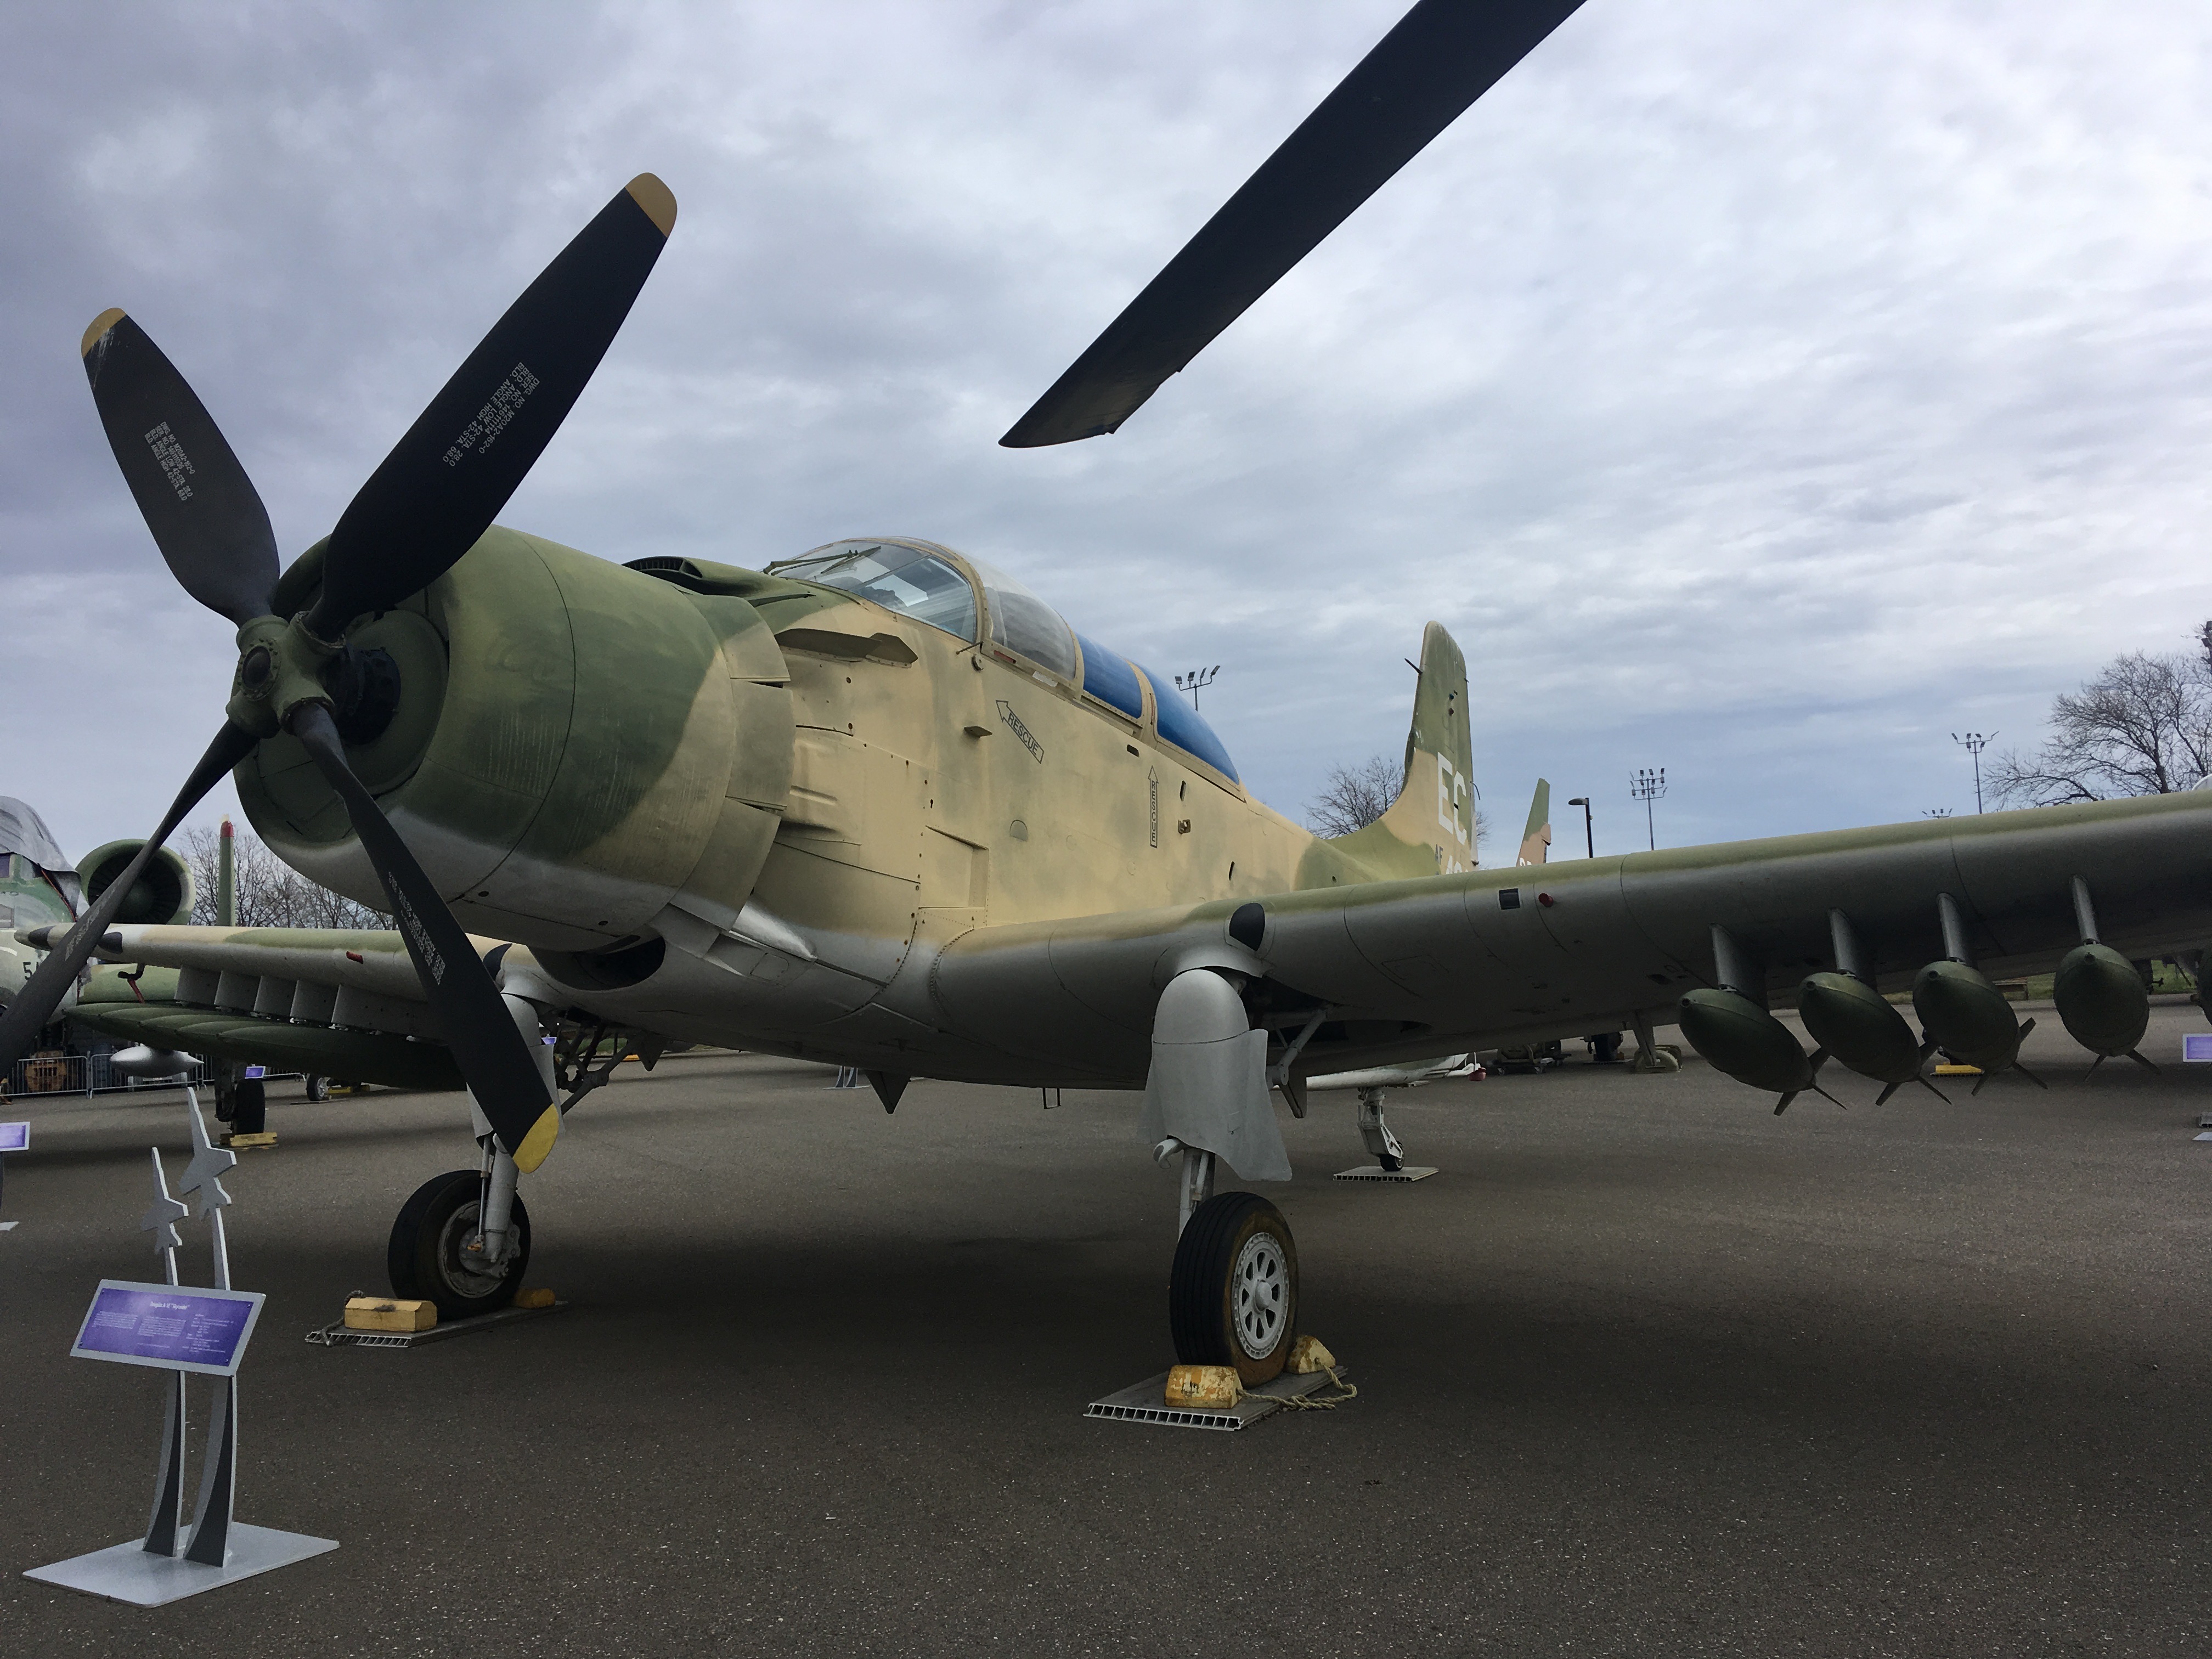 The_A-1E_%22Skyraider%22_on_display_at_t